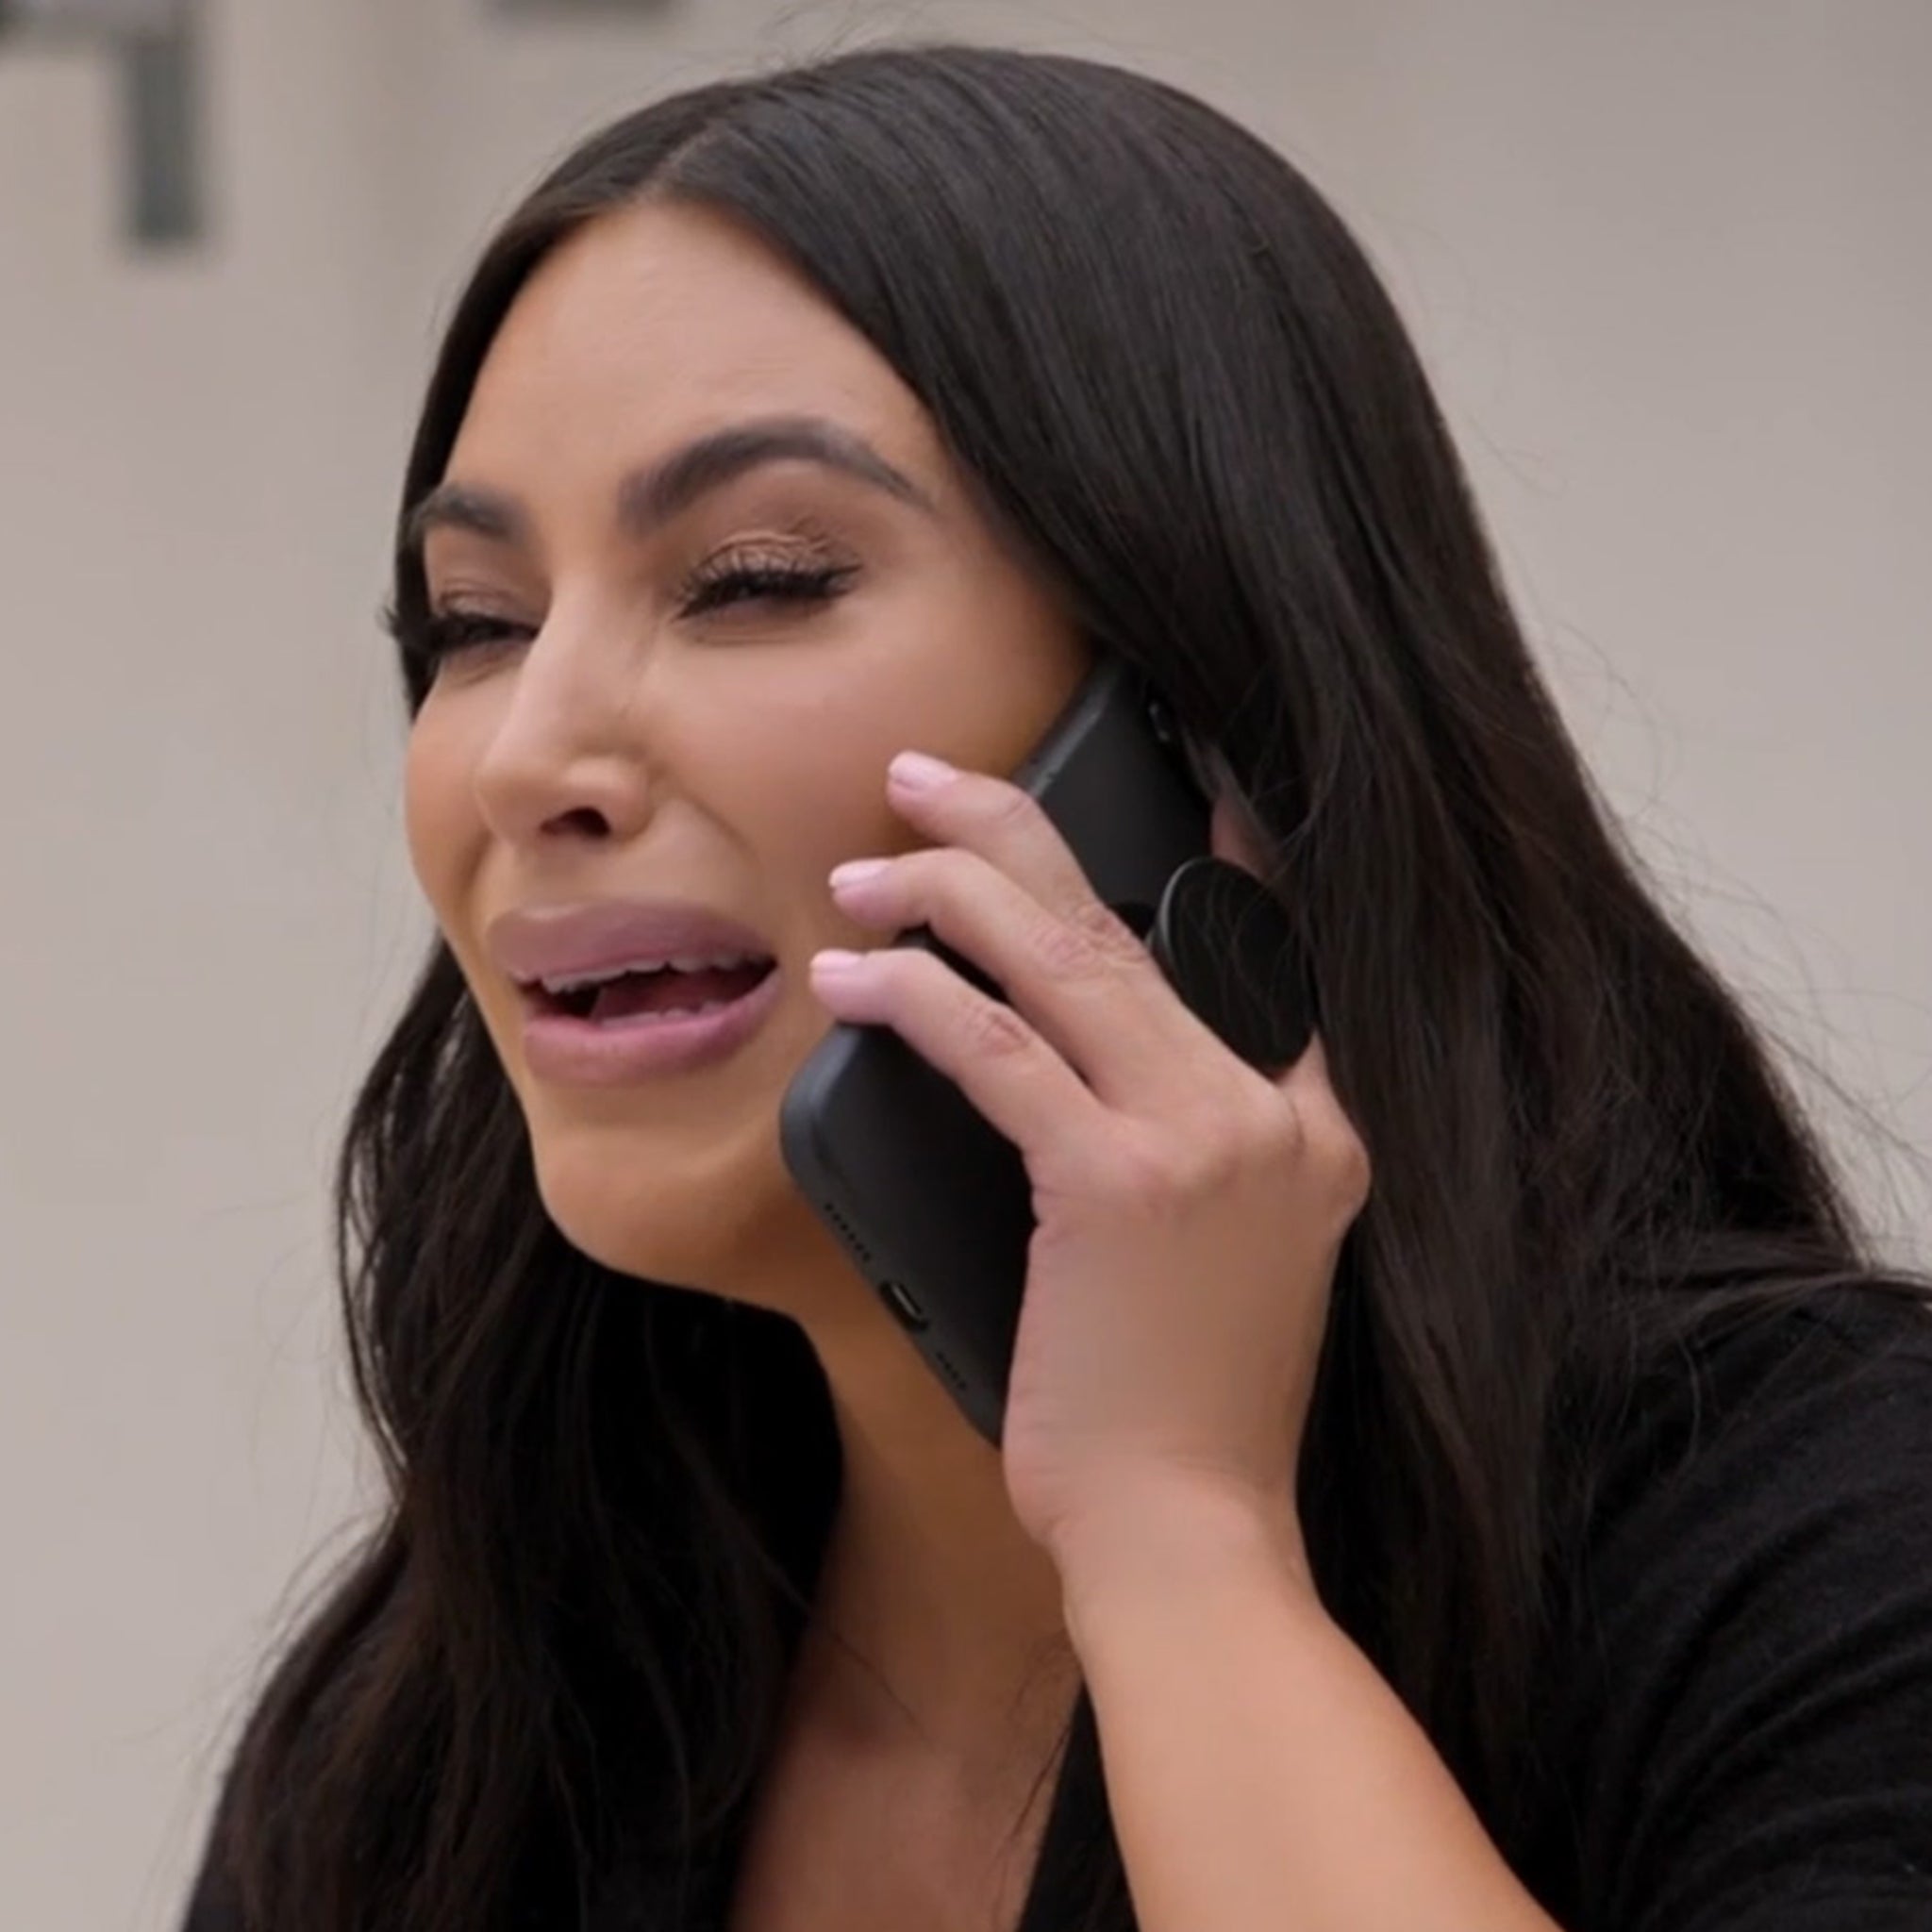 Sexxx Force - Kim Kardashian Sobs Over Sex Tape with Ray J in Graphic Call with Lawyer